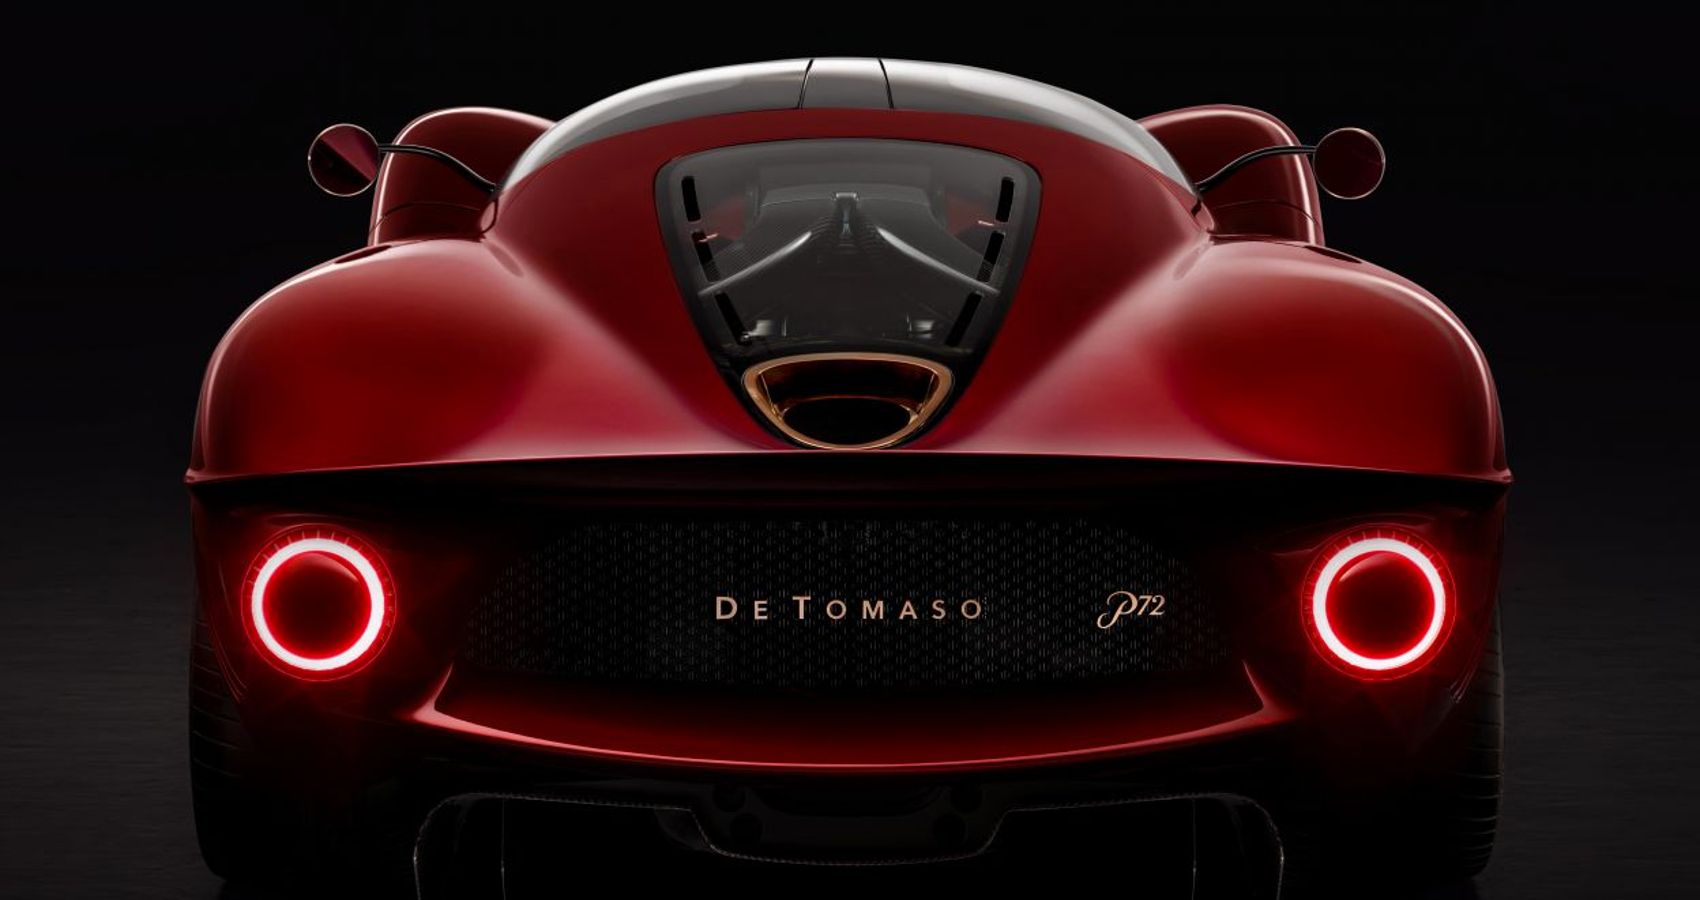 The Real Story Behind De Tomaso